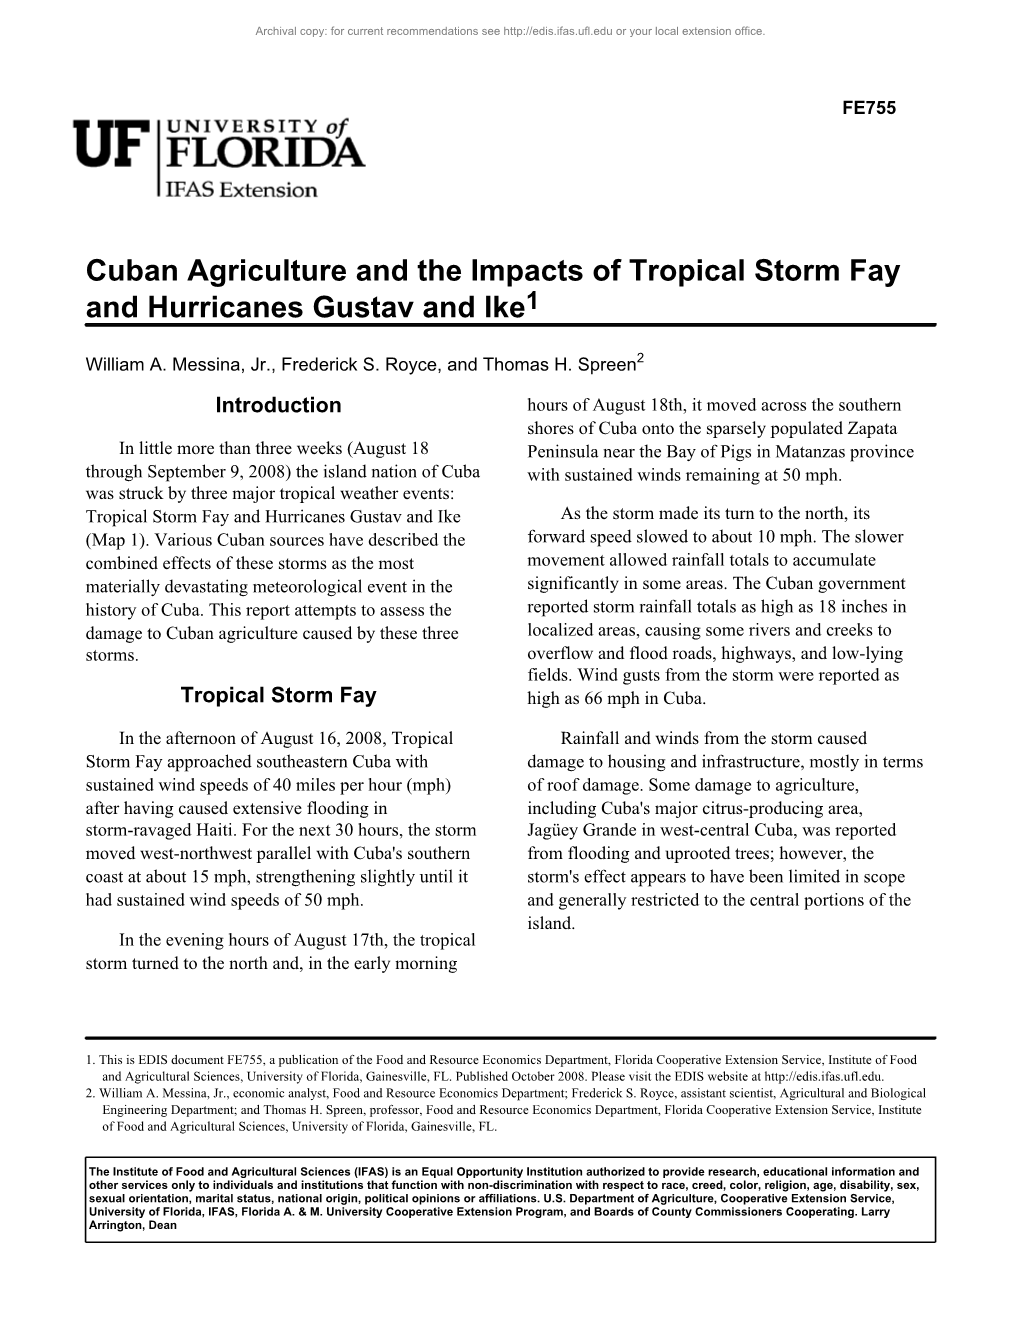 Cuban Agriculture and the Impacts of Tropical Storm Fay and Hurricanes Gustav and Ike1